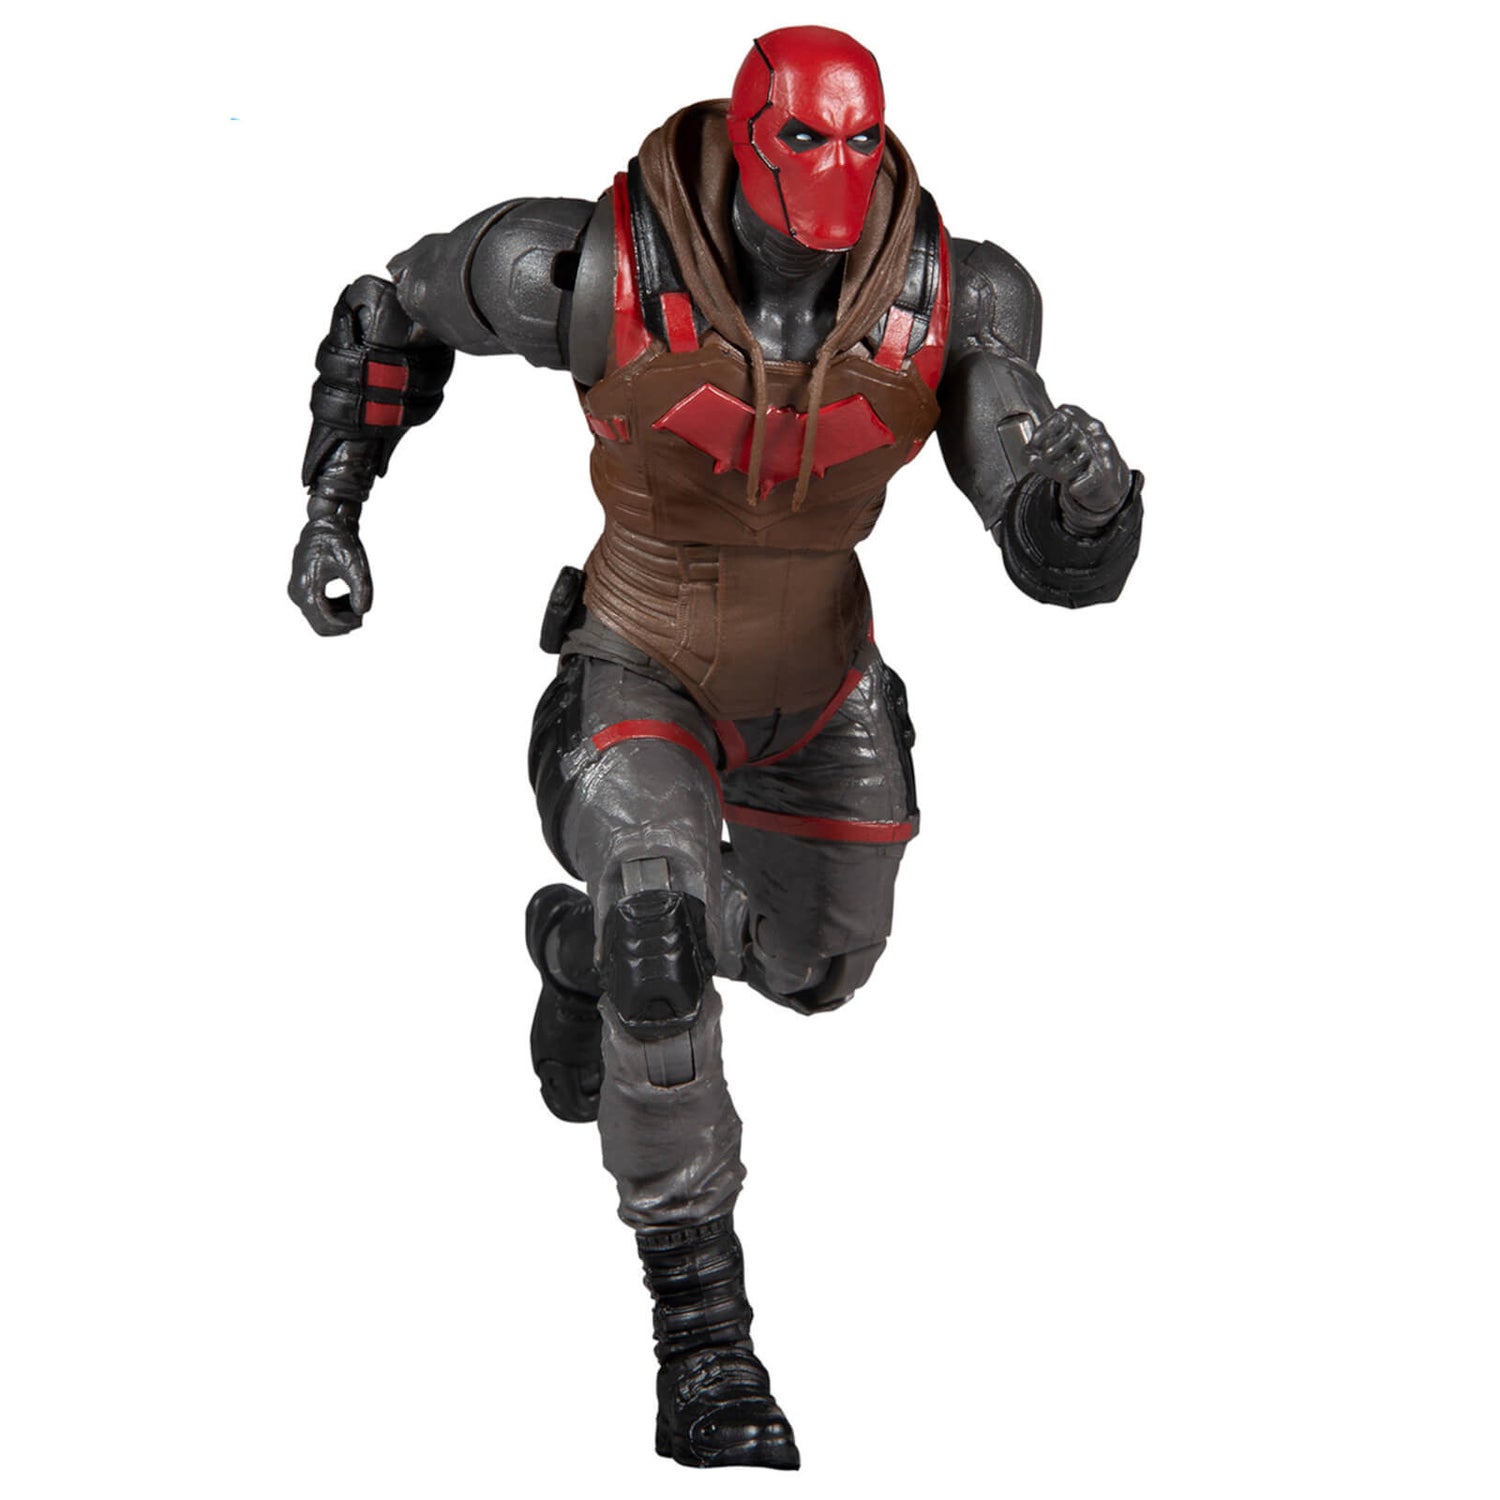 McFarlane DC Gaming 7 Inch Action Figure - Red Hood (Gotham Knights)